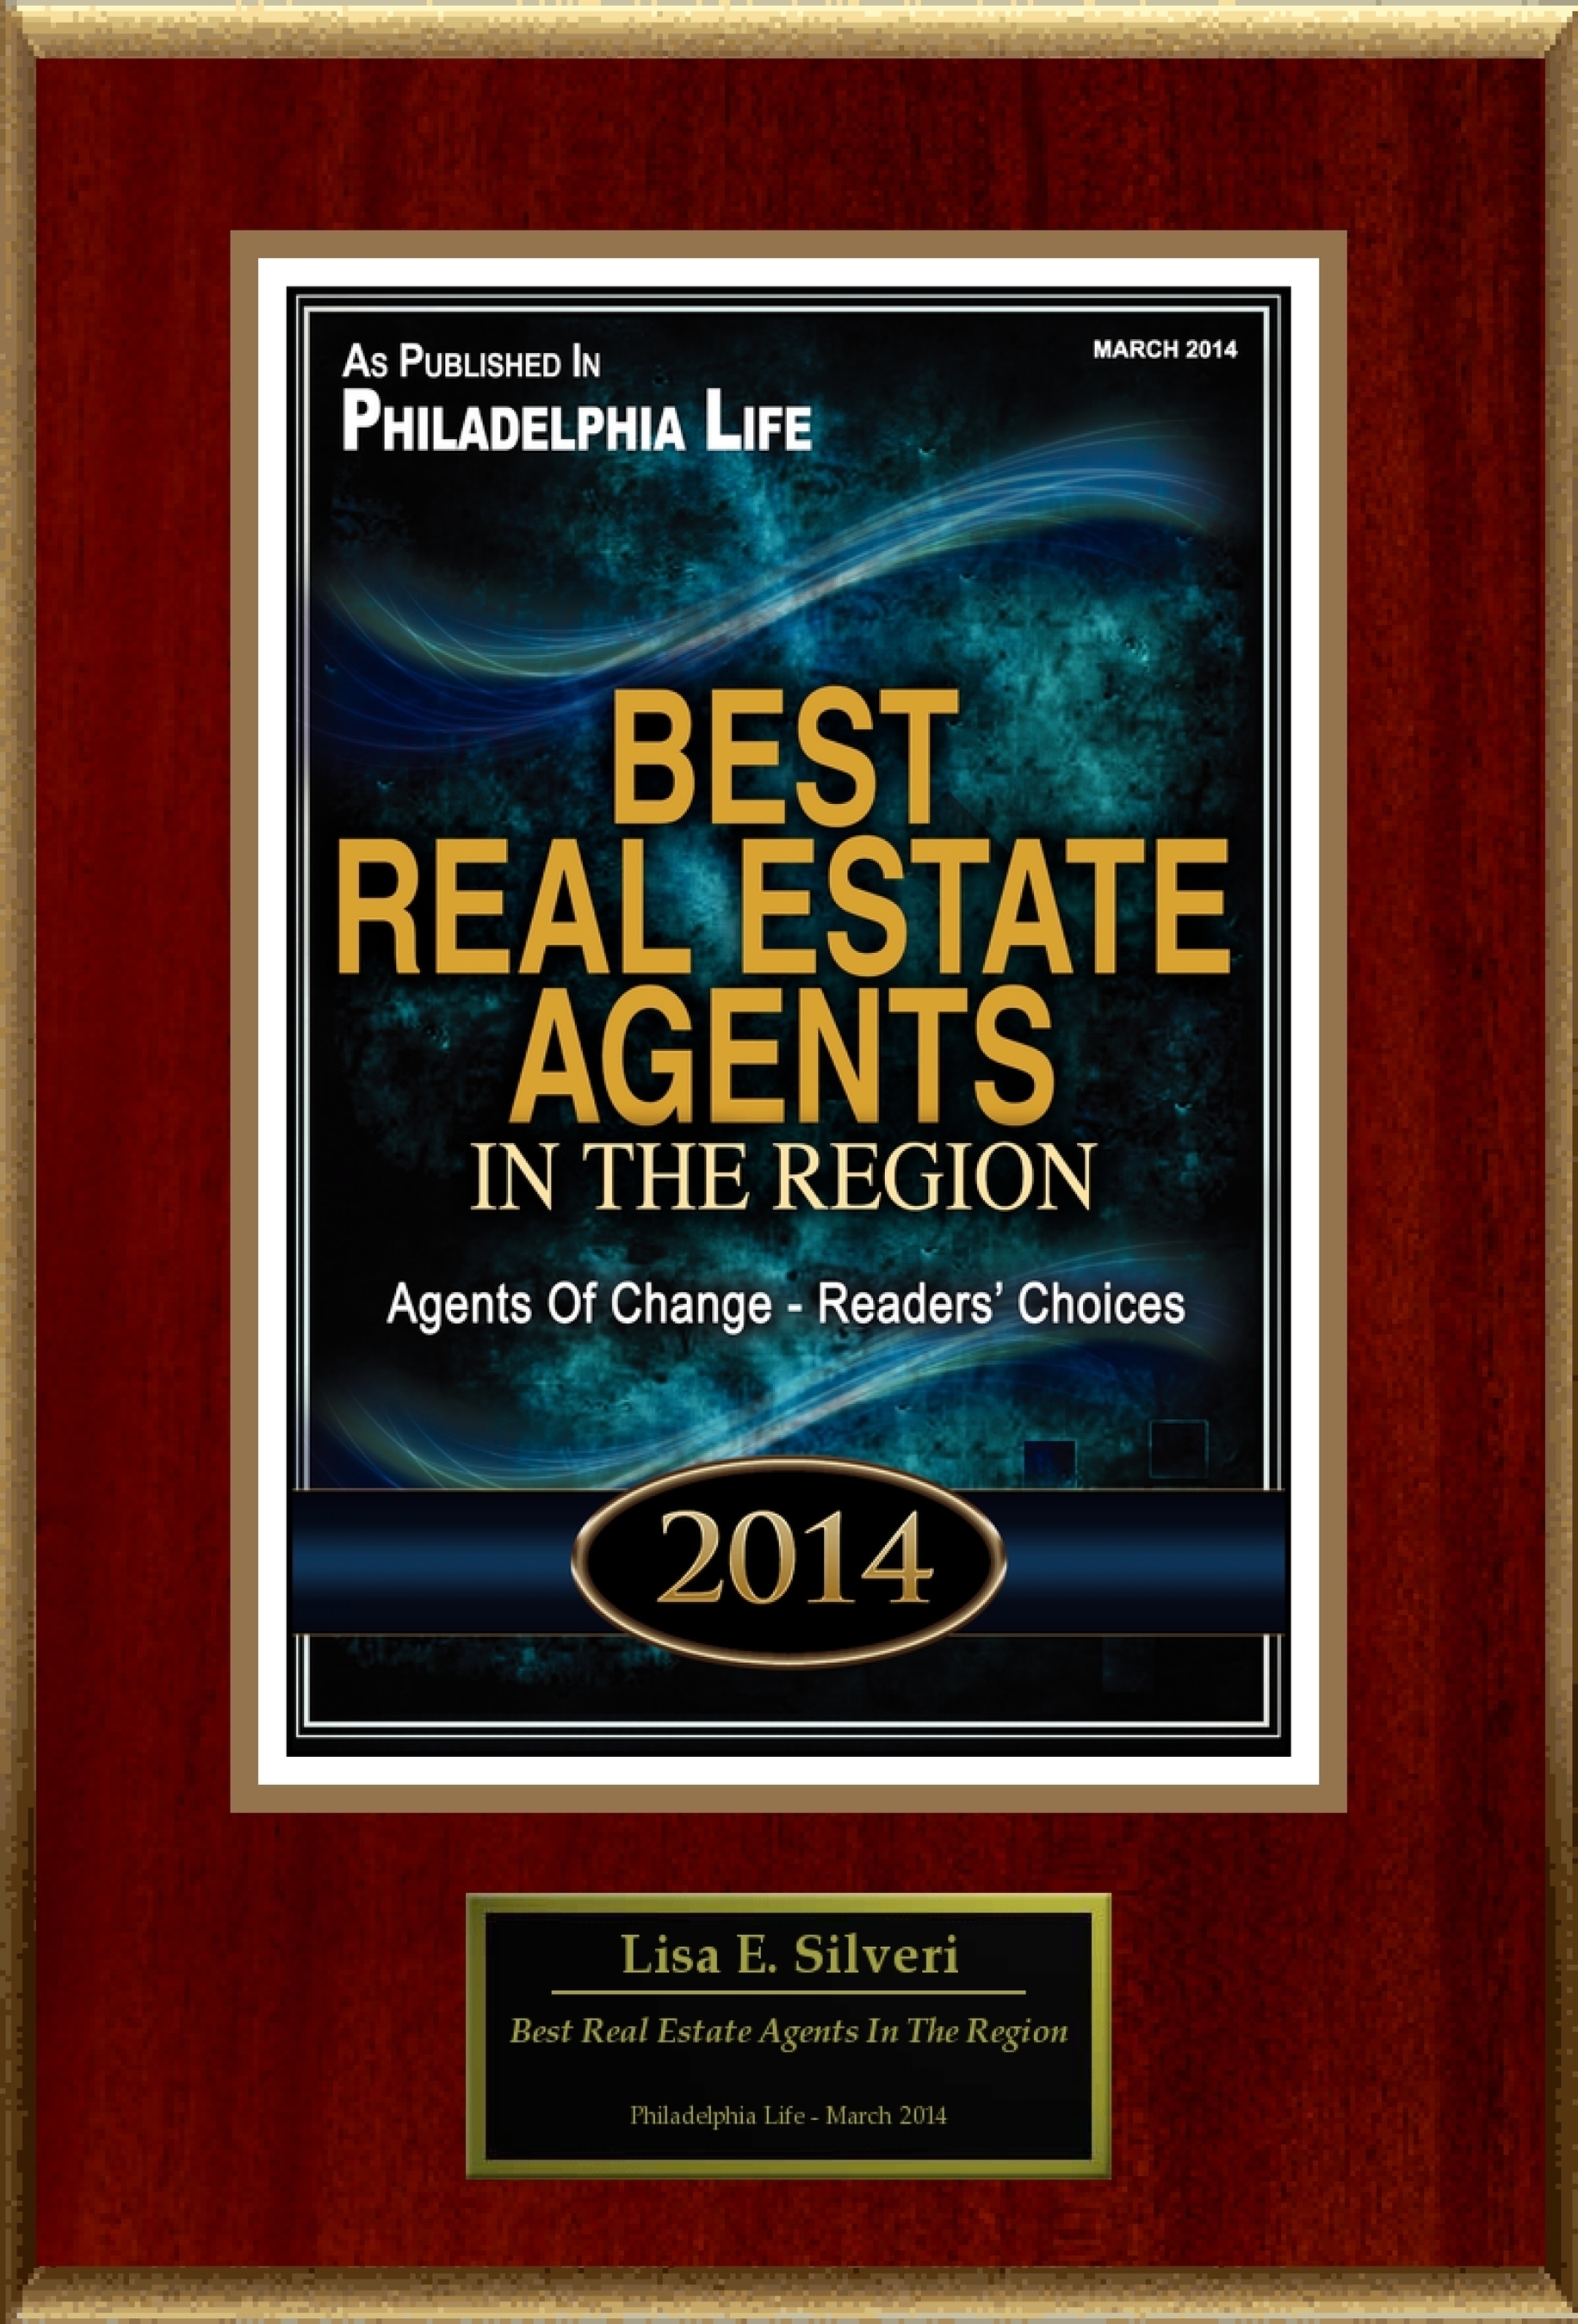 Lisa E. Silveri Selected For "Best Real Estate Agents In The Region" (PRNewsFoto/American Registry)